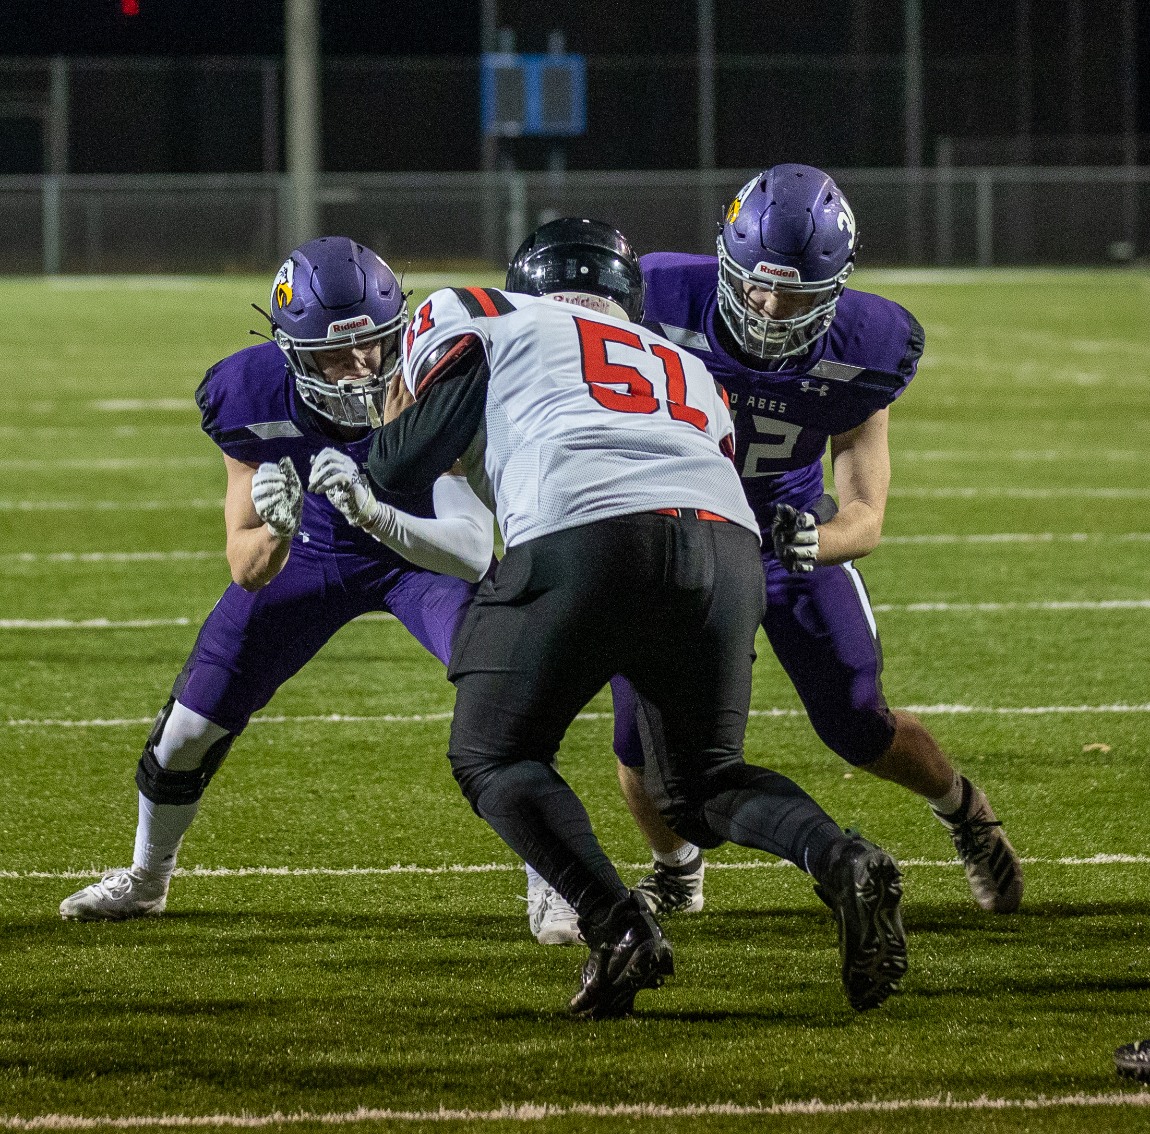 Eau-Claire-Memorial-JV-Football-LaCrosse-Central-at-Home-3-29-21-1881